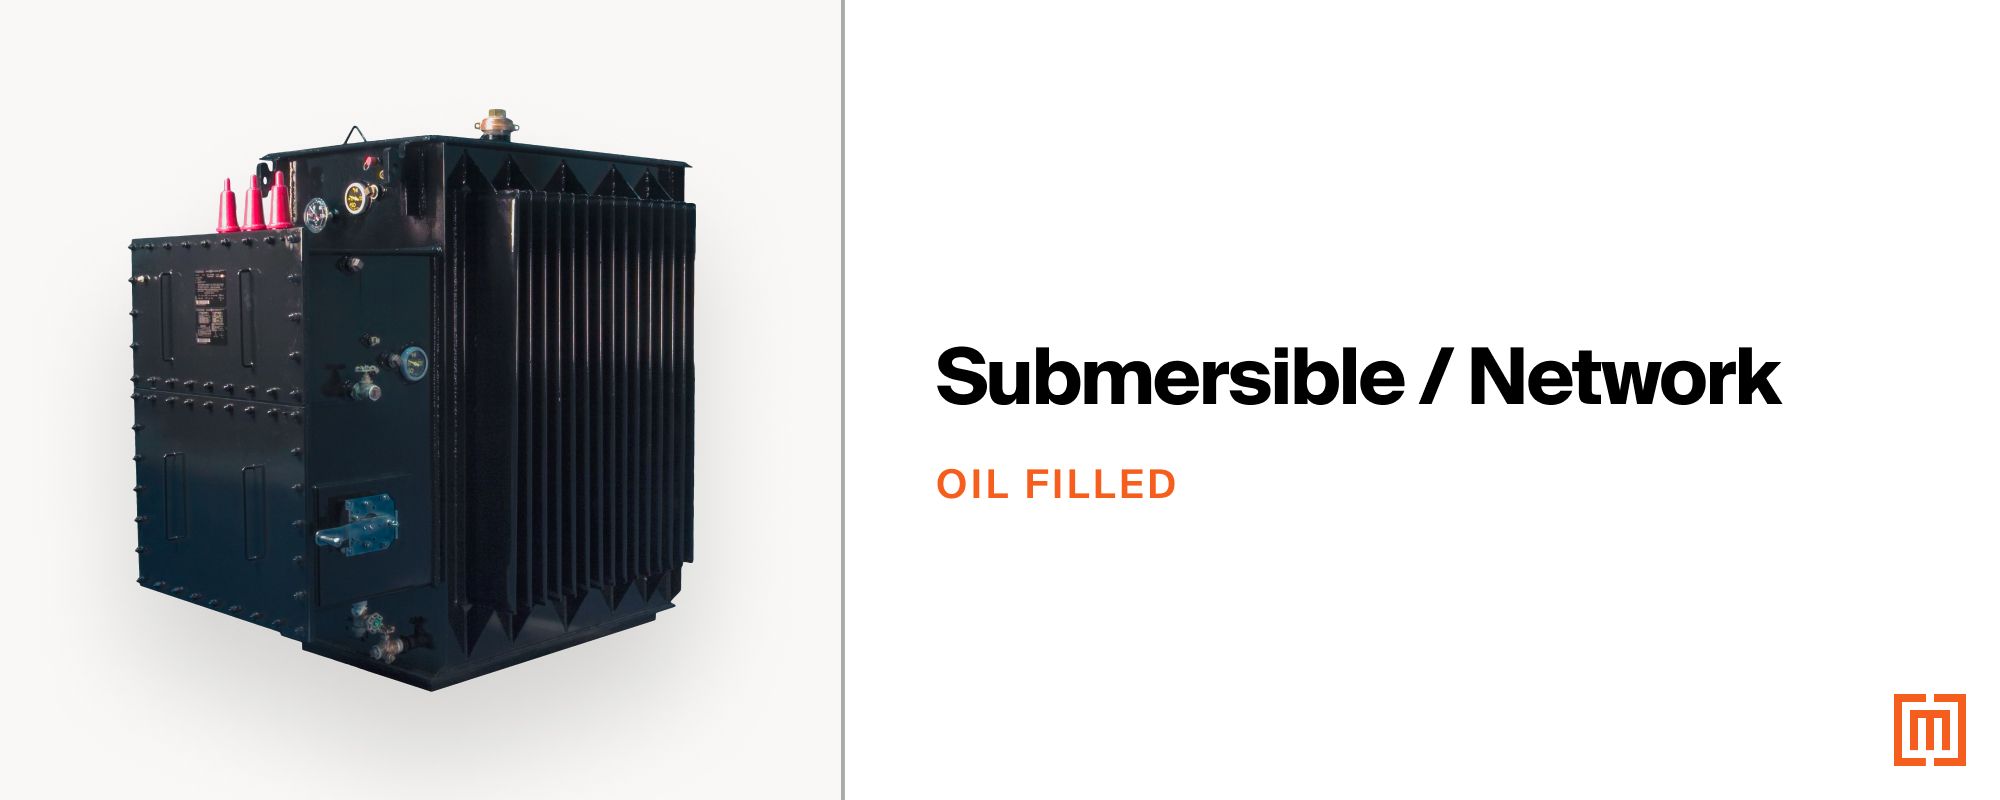 An oil filled submersible network transformer